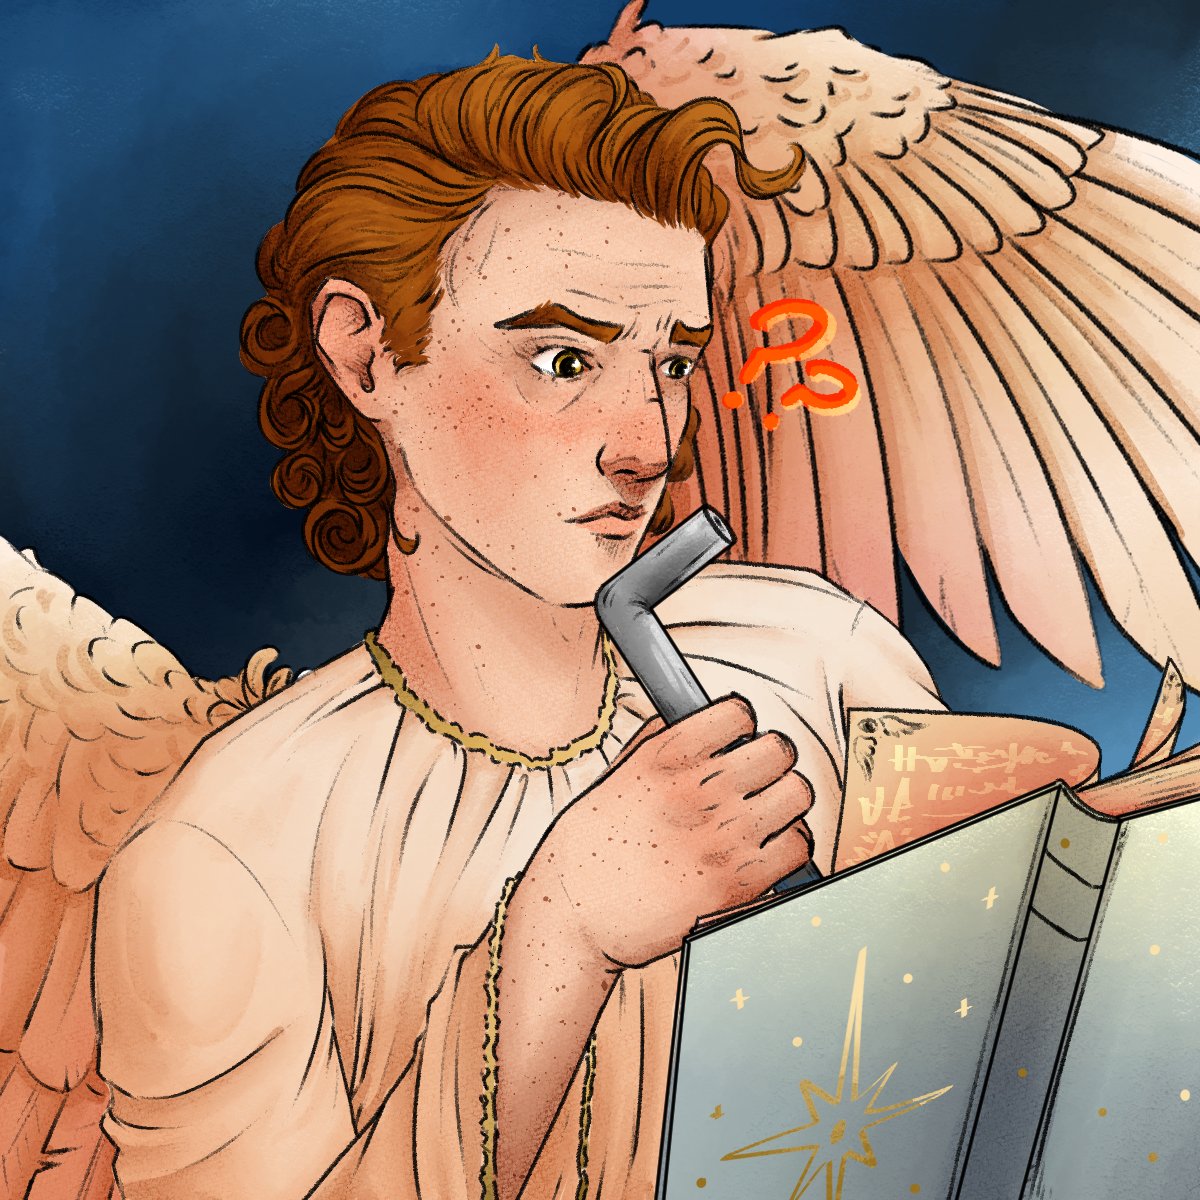 God hasn't quite got around to inventing braincells yet, so this baby is doing their best with what they've got. #goodomensfanart #ineffablehusbands #aziracrow